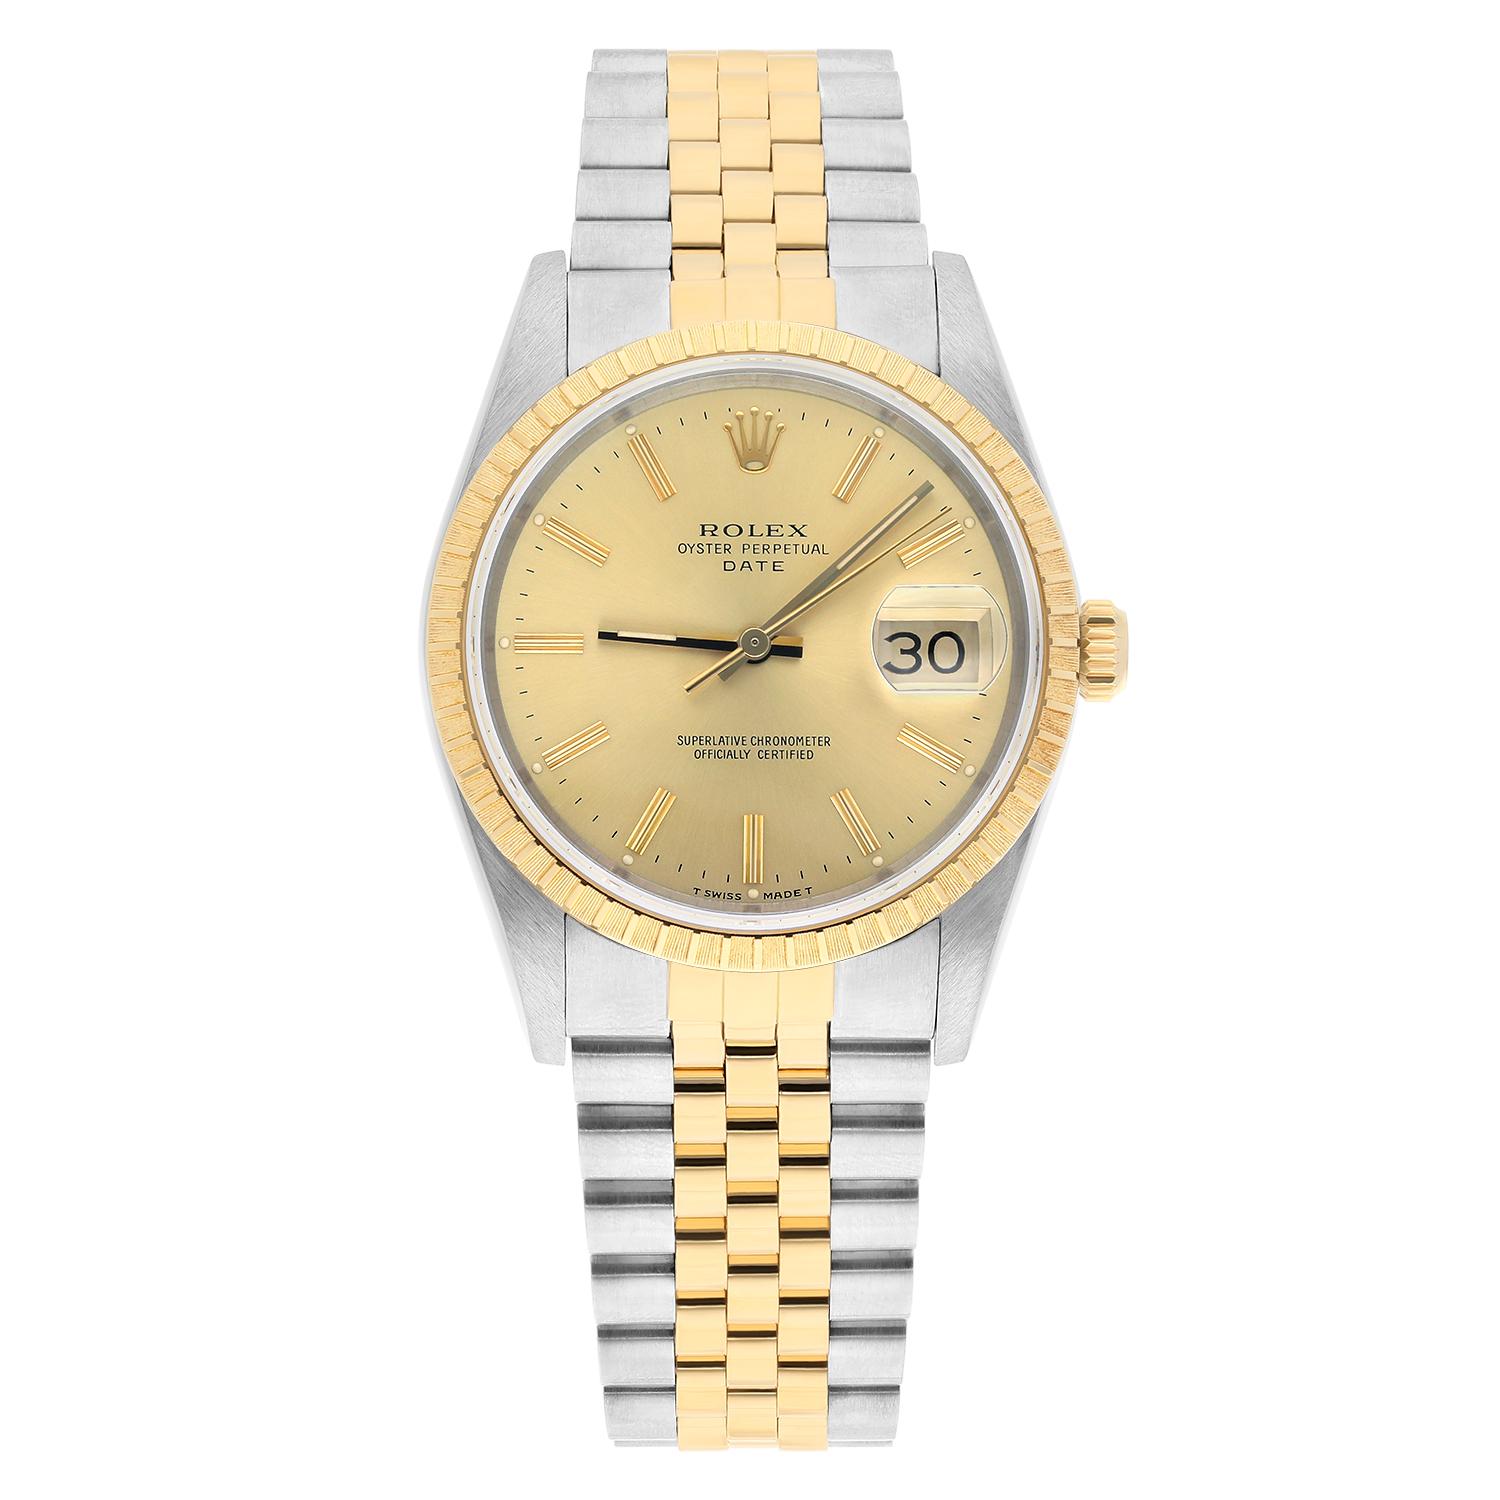 This watch has been professionally polished, serviced and is in excellent overall condition. There are absolutely no visible scratches or blemishes. Model features quick-set movement. Bracelet original Rolex. Authenticity guaranteed! The sale comes